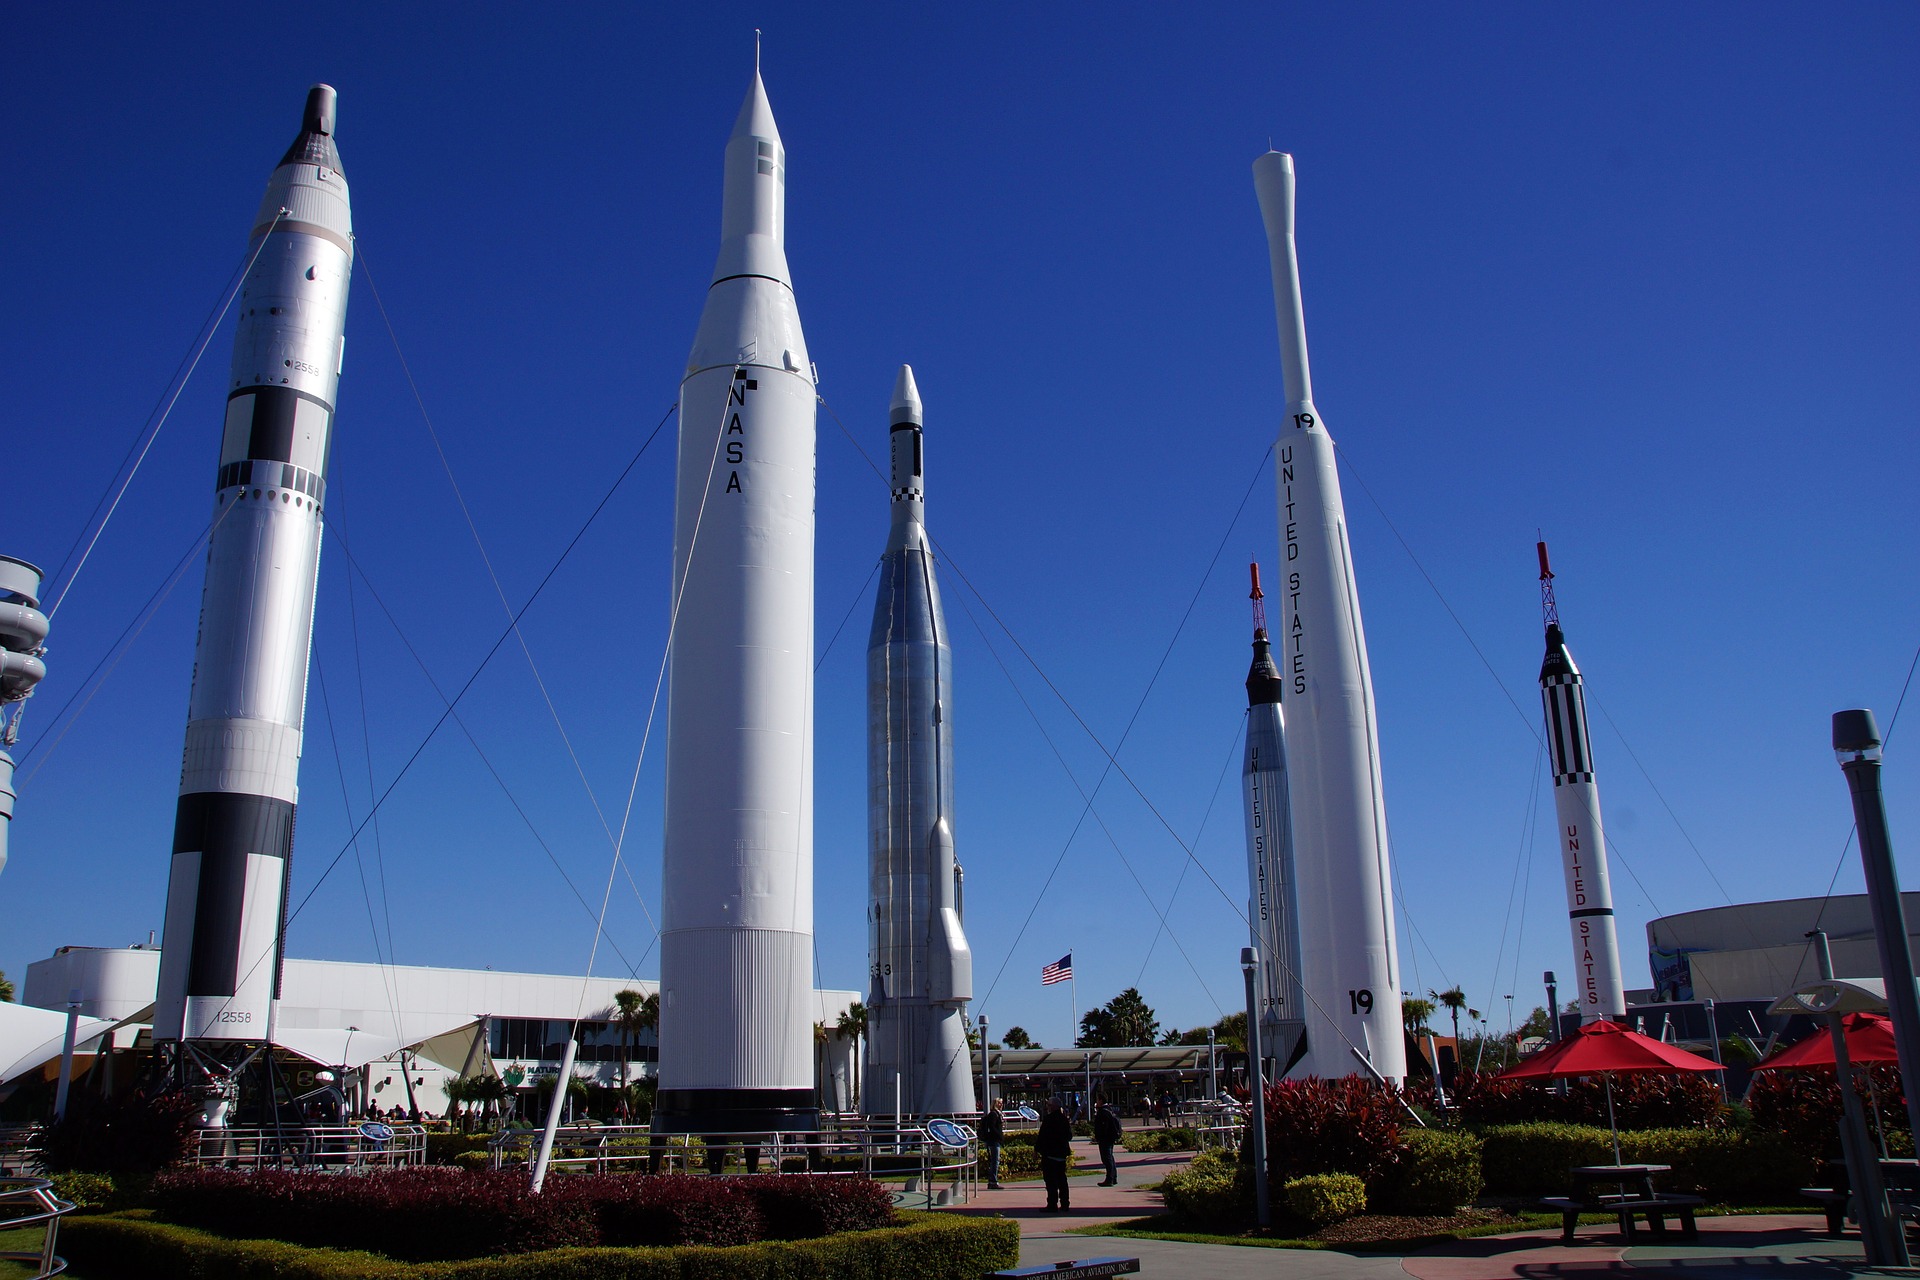 Foguetes no Kennedy Space Center